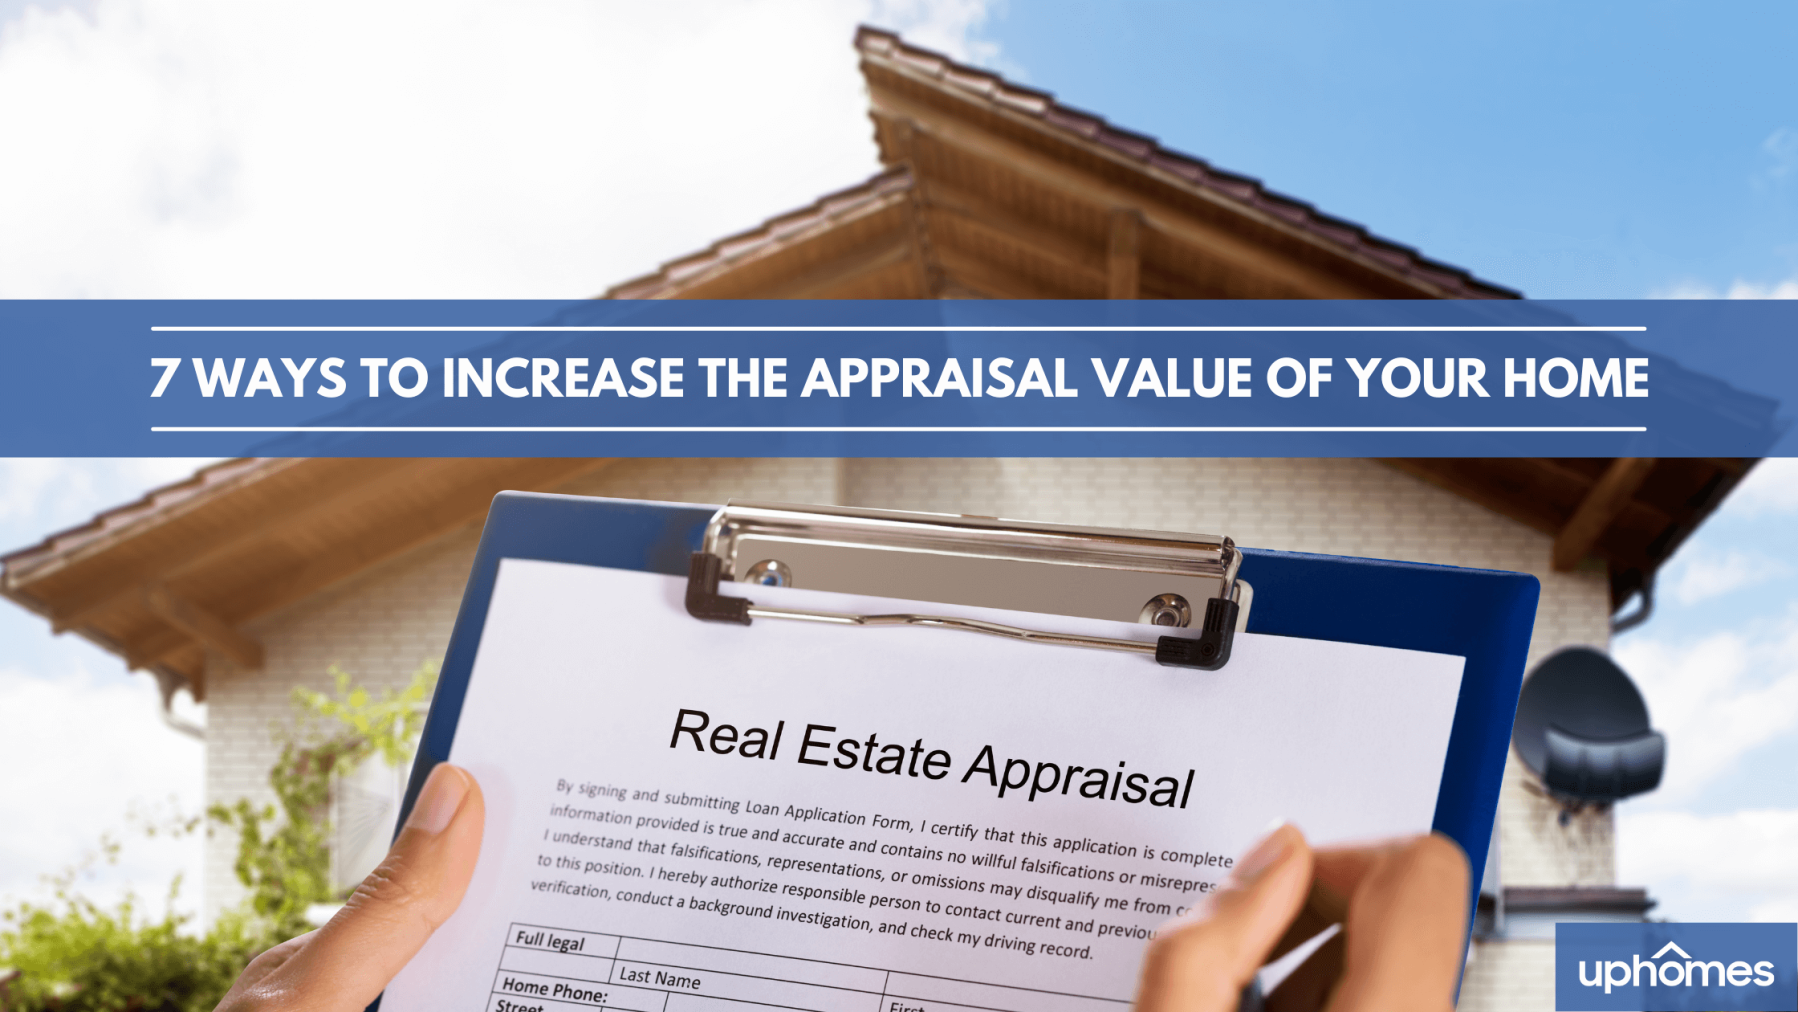 7 Ways to Increase the Appraisal Value of Your Home